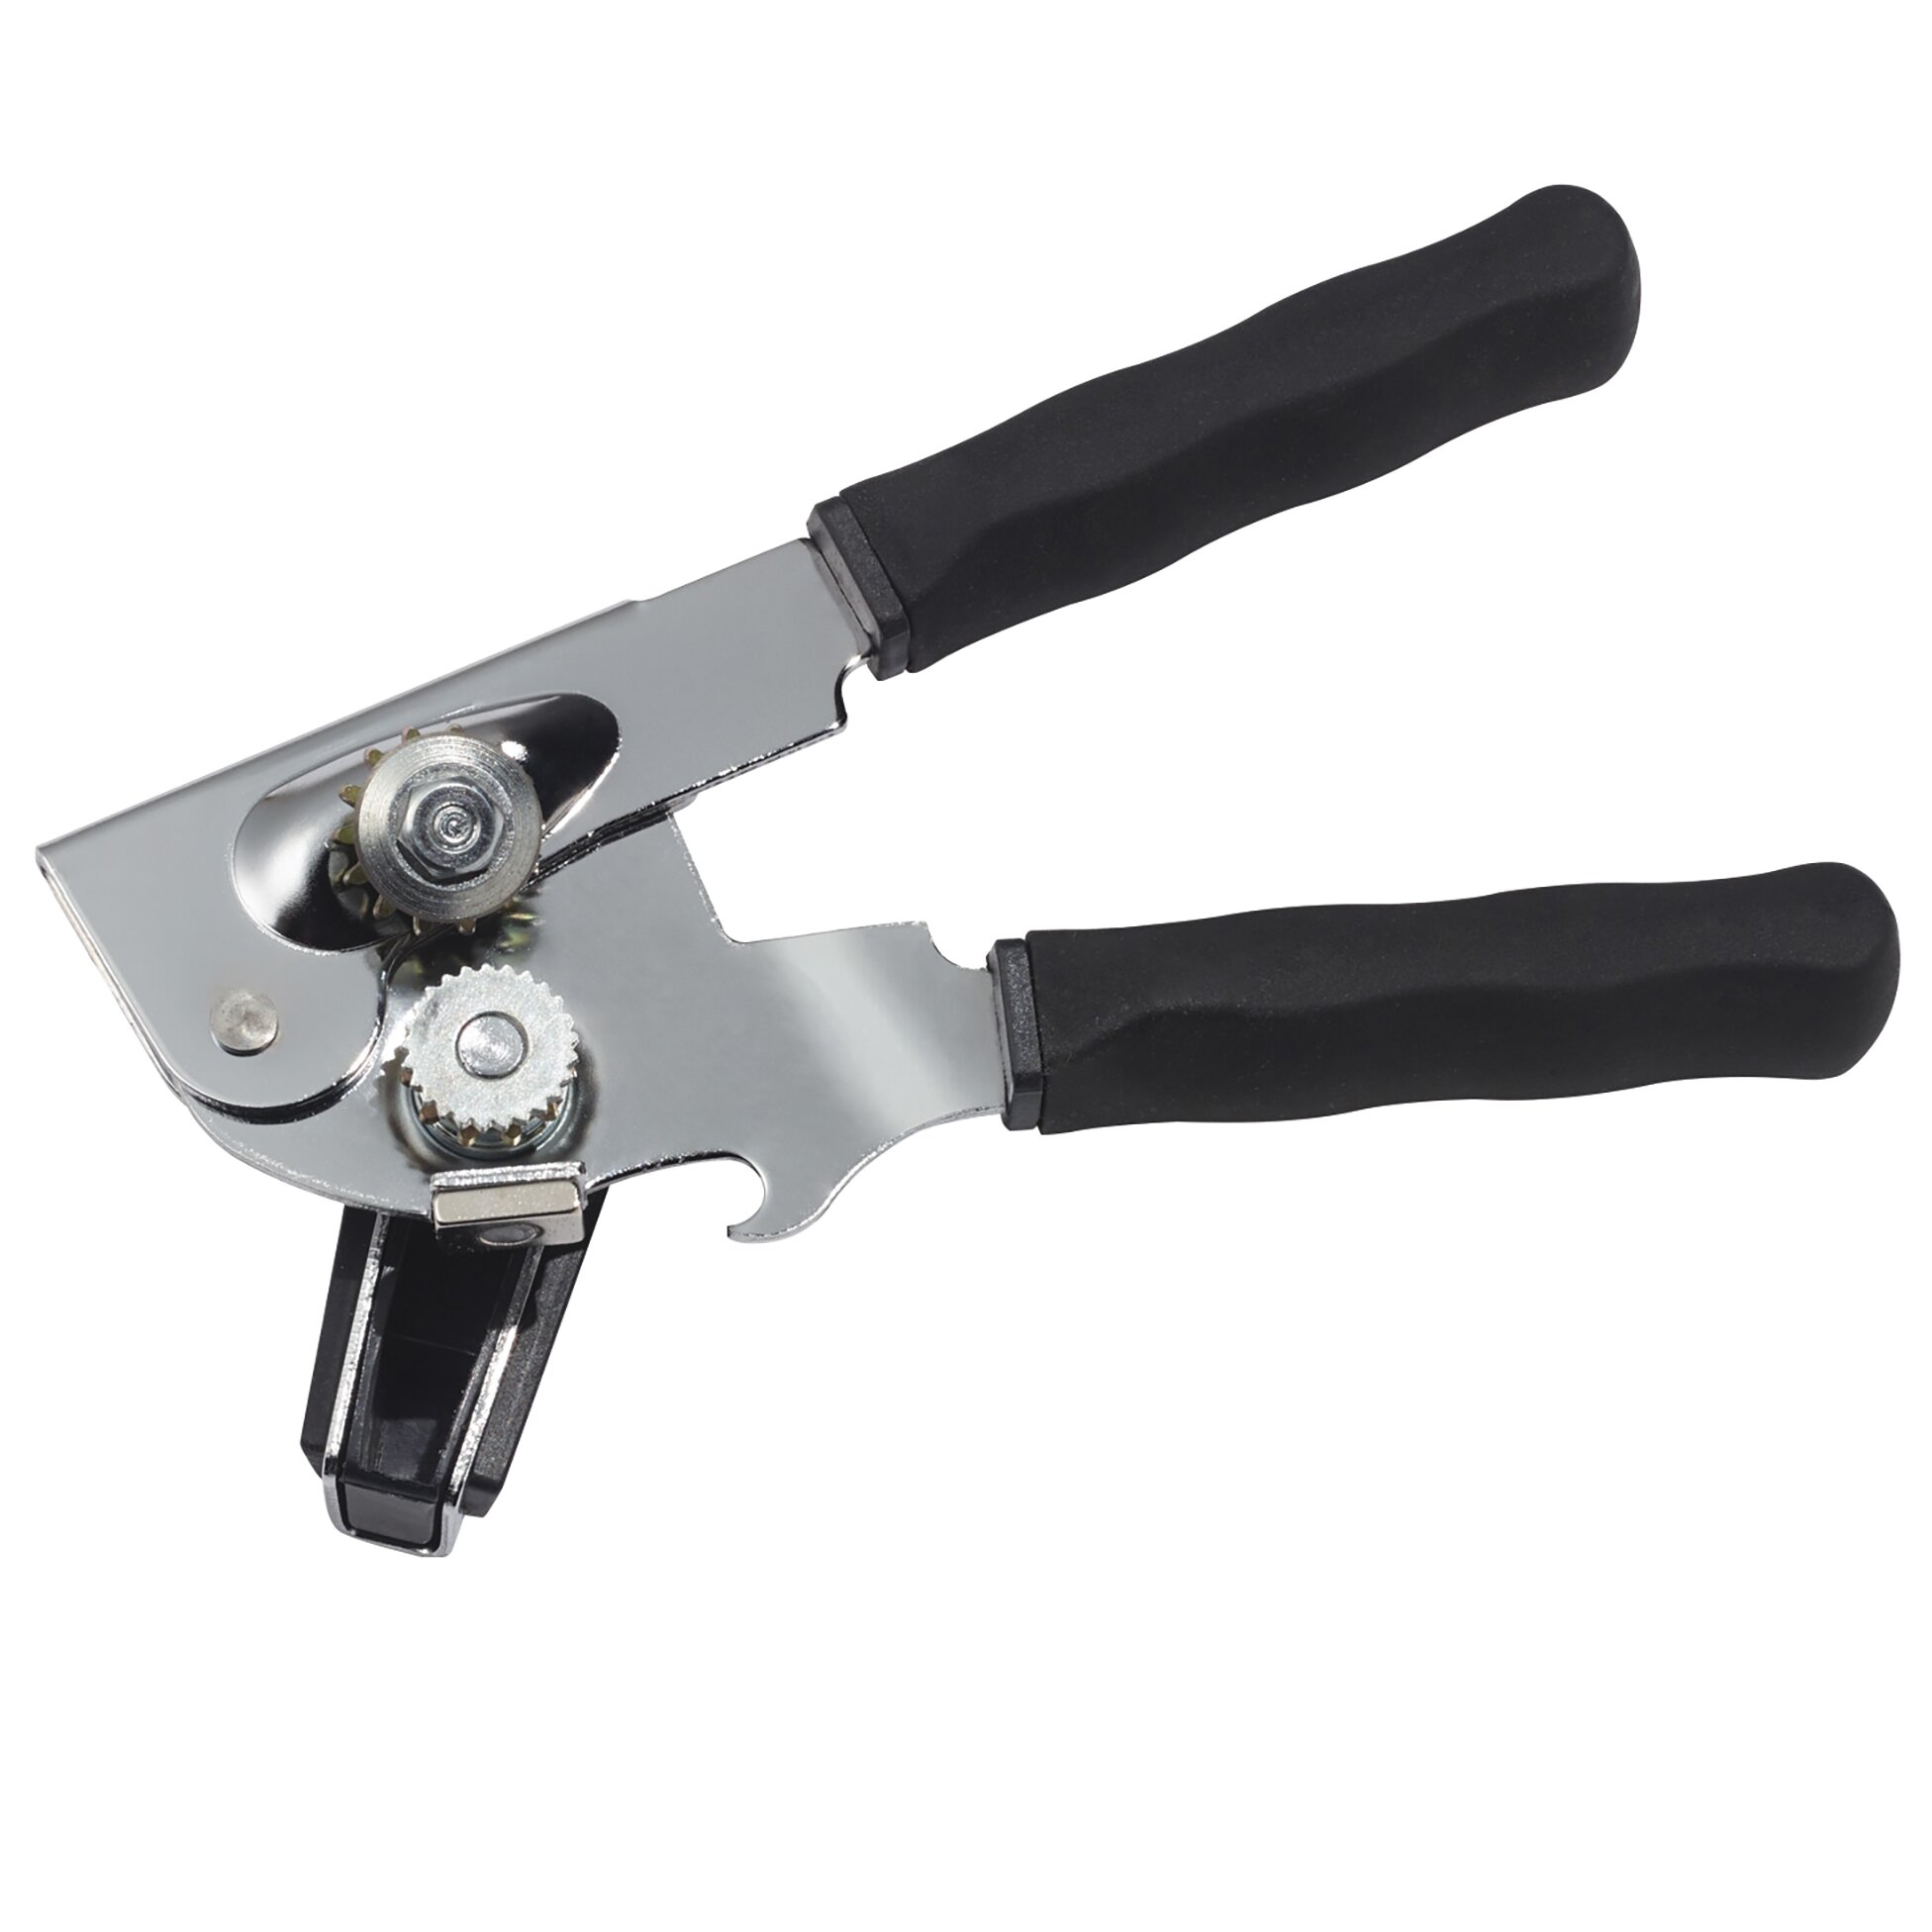 Swing-A-Way Wall Can Opener Magnetic White